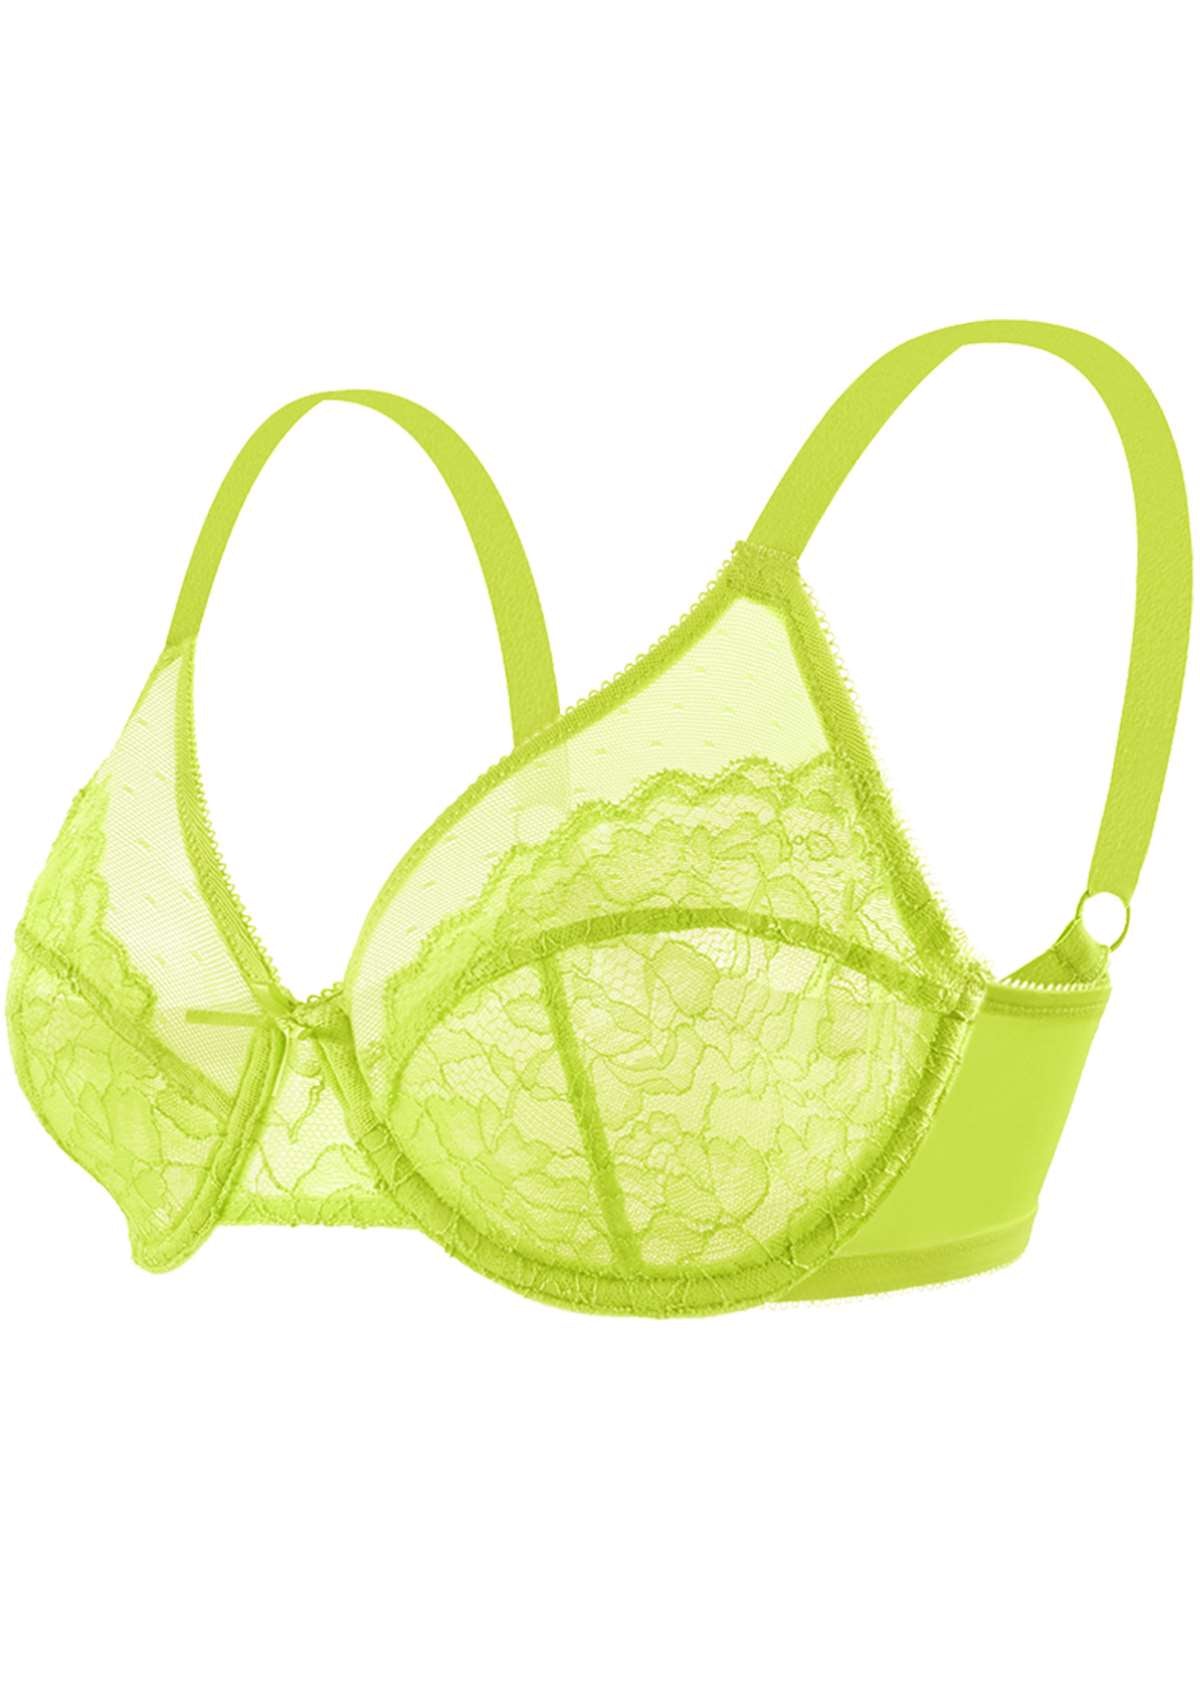 HSIA Enchante Full Cup Minimizing Bra: Supportive Unlined Lace Bra - Lime Green / 42 / C